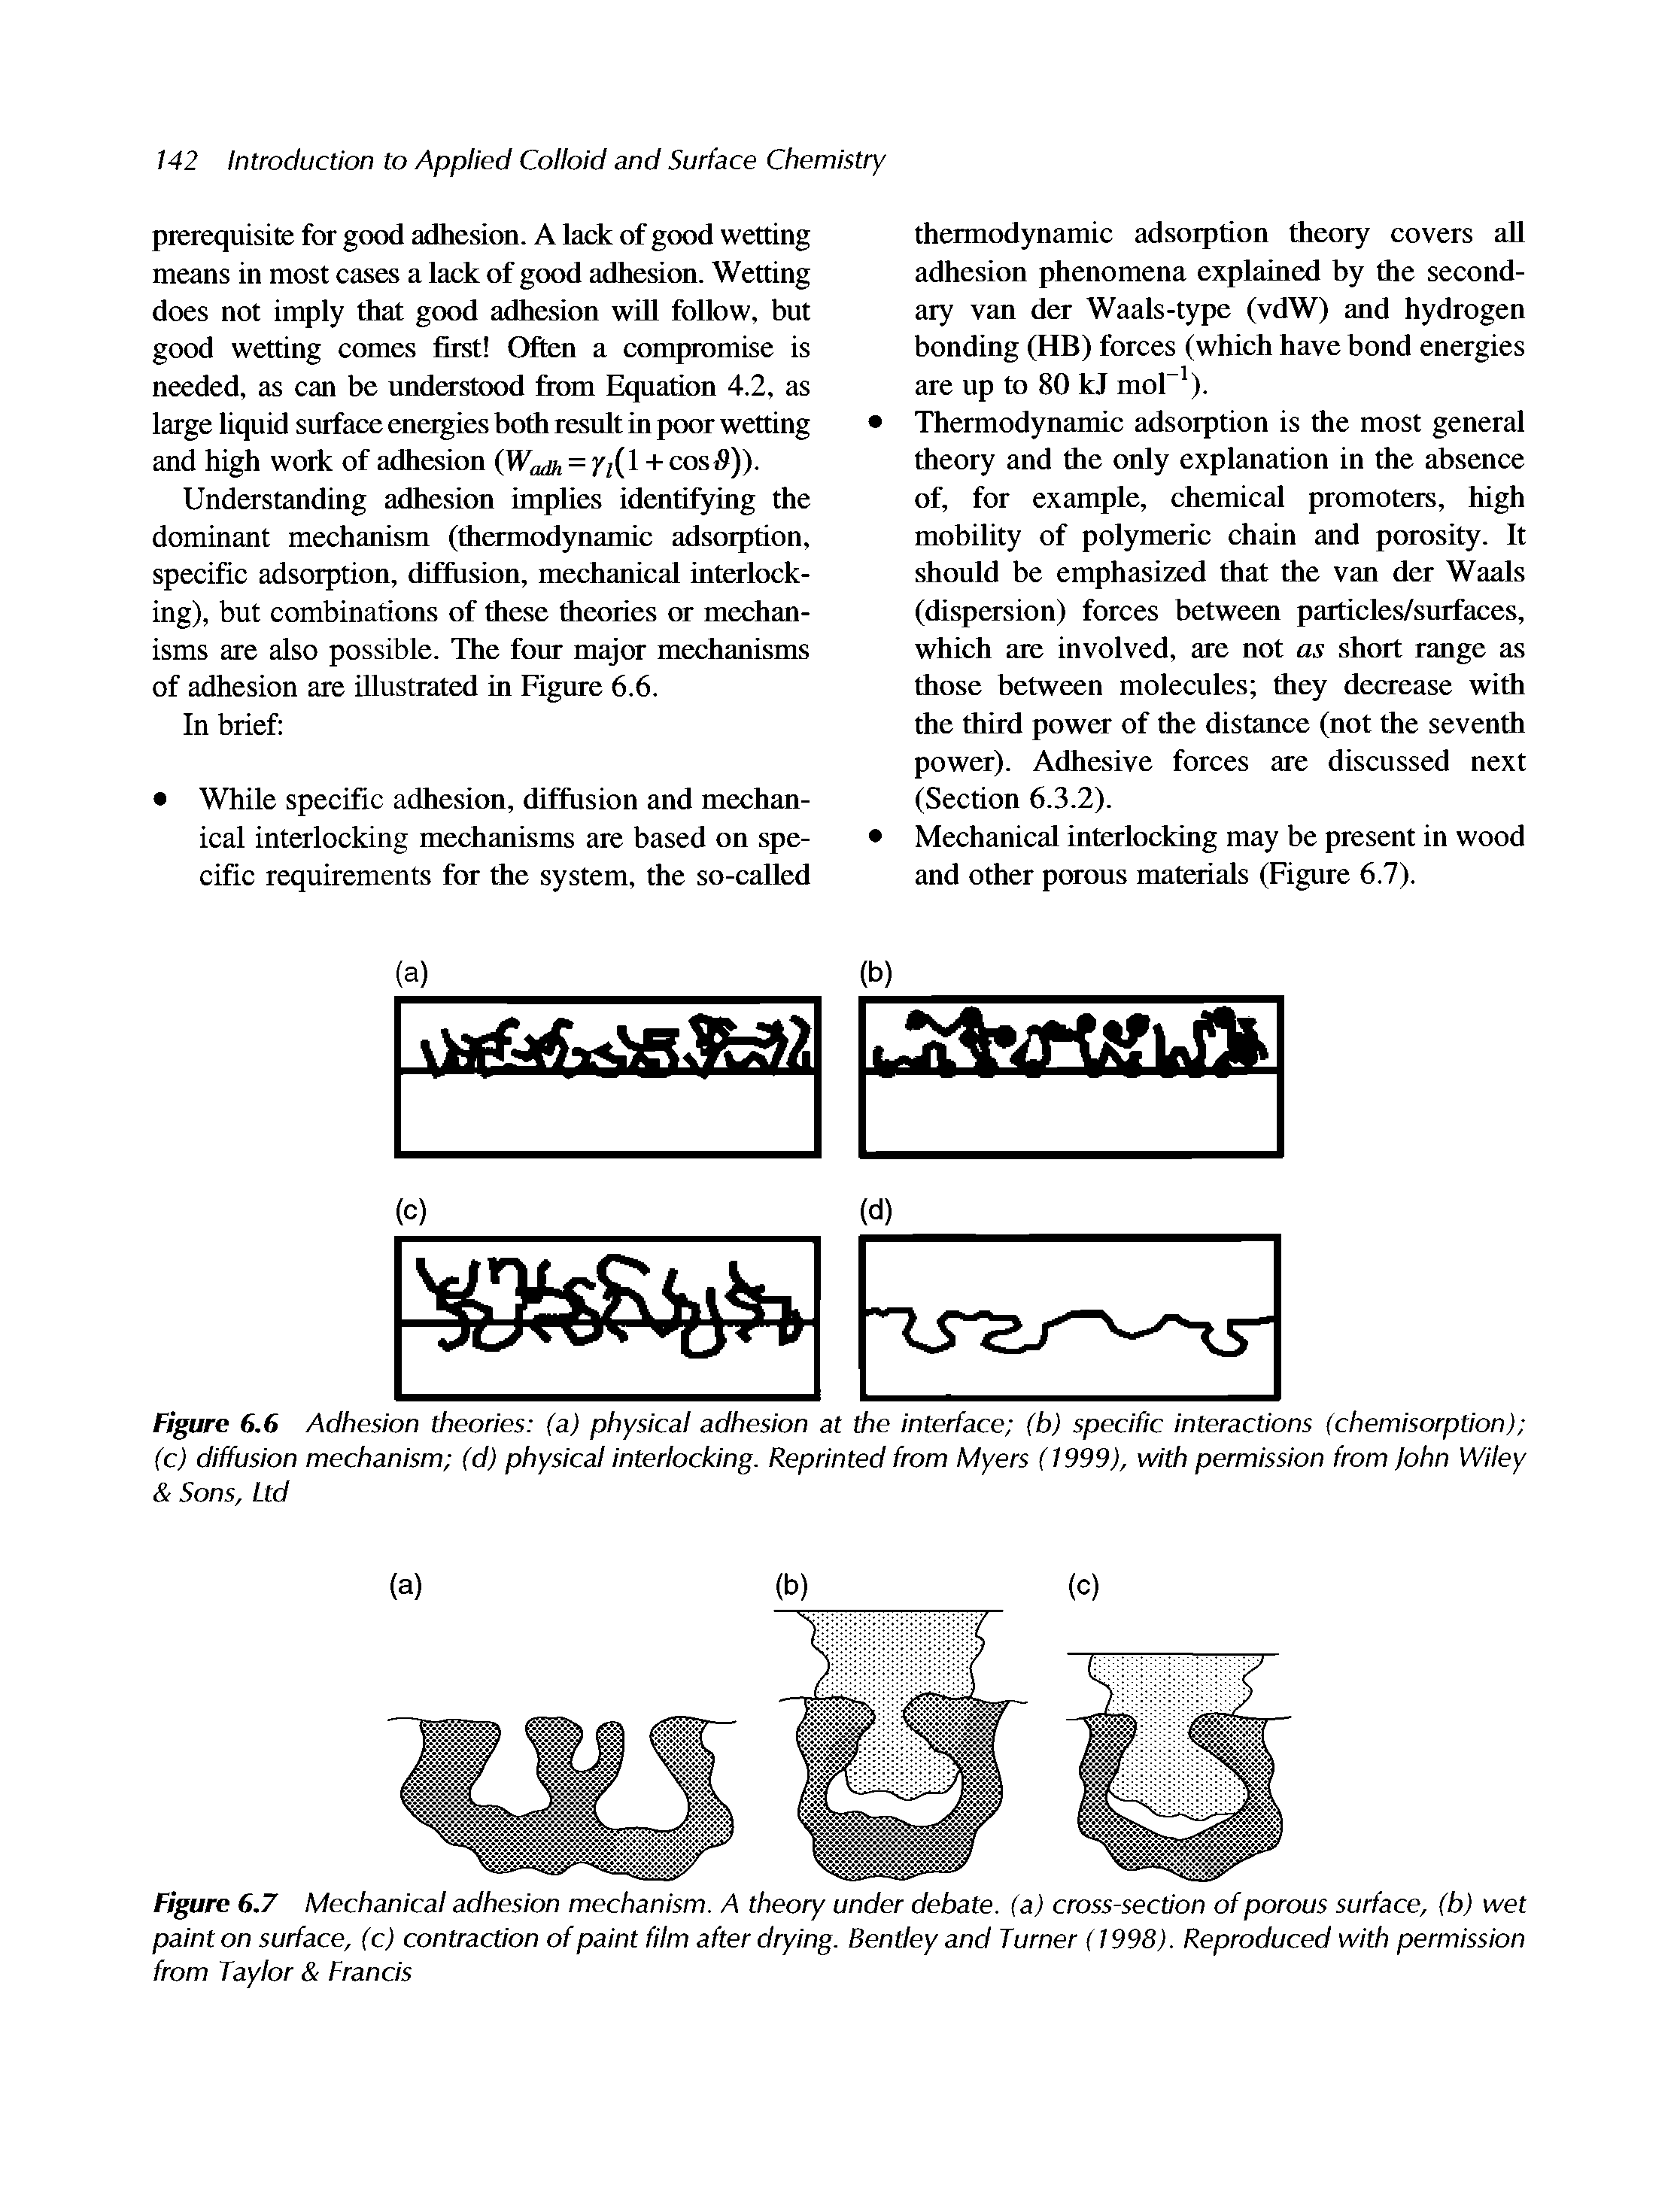 Figure 6.6 Adhesion theories (a) physical adhesion at the interface (b) specific interactions (chemisorption) (c) diffusion mechanism (d) physical interlocking. Reprinted from Myers (1999), with permission from John Wiley Sons, Ltd...